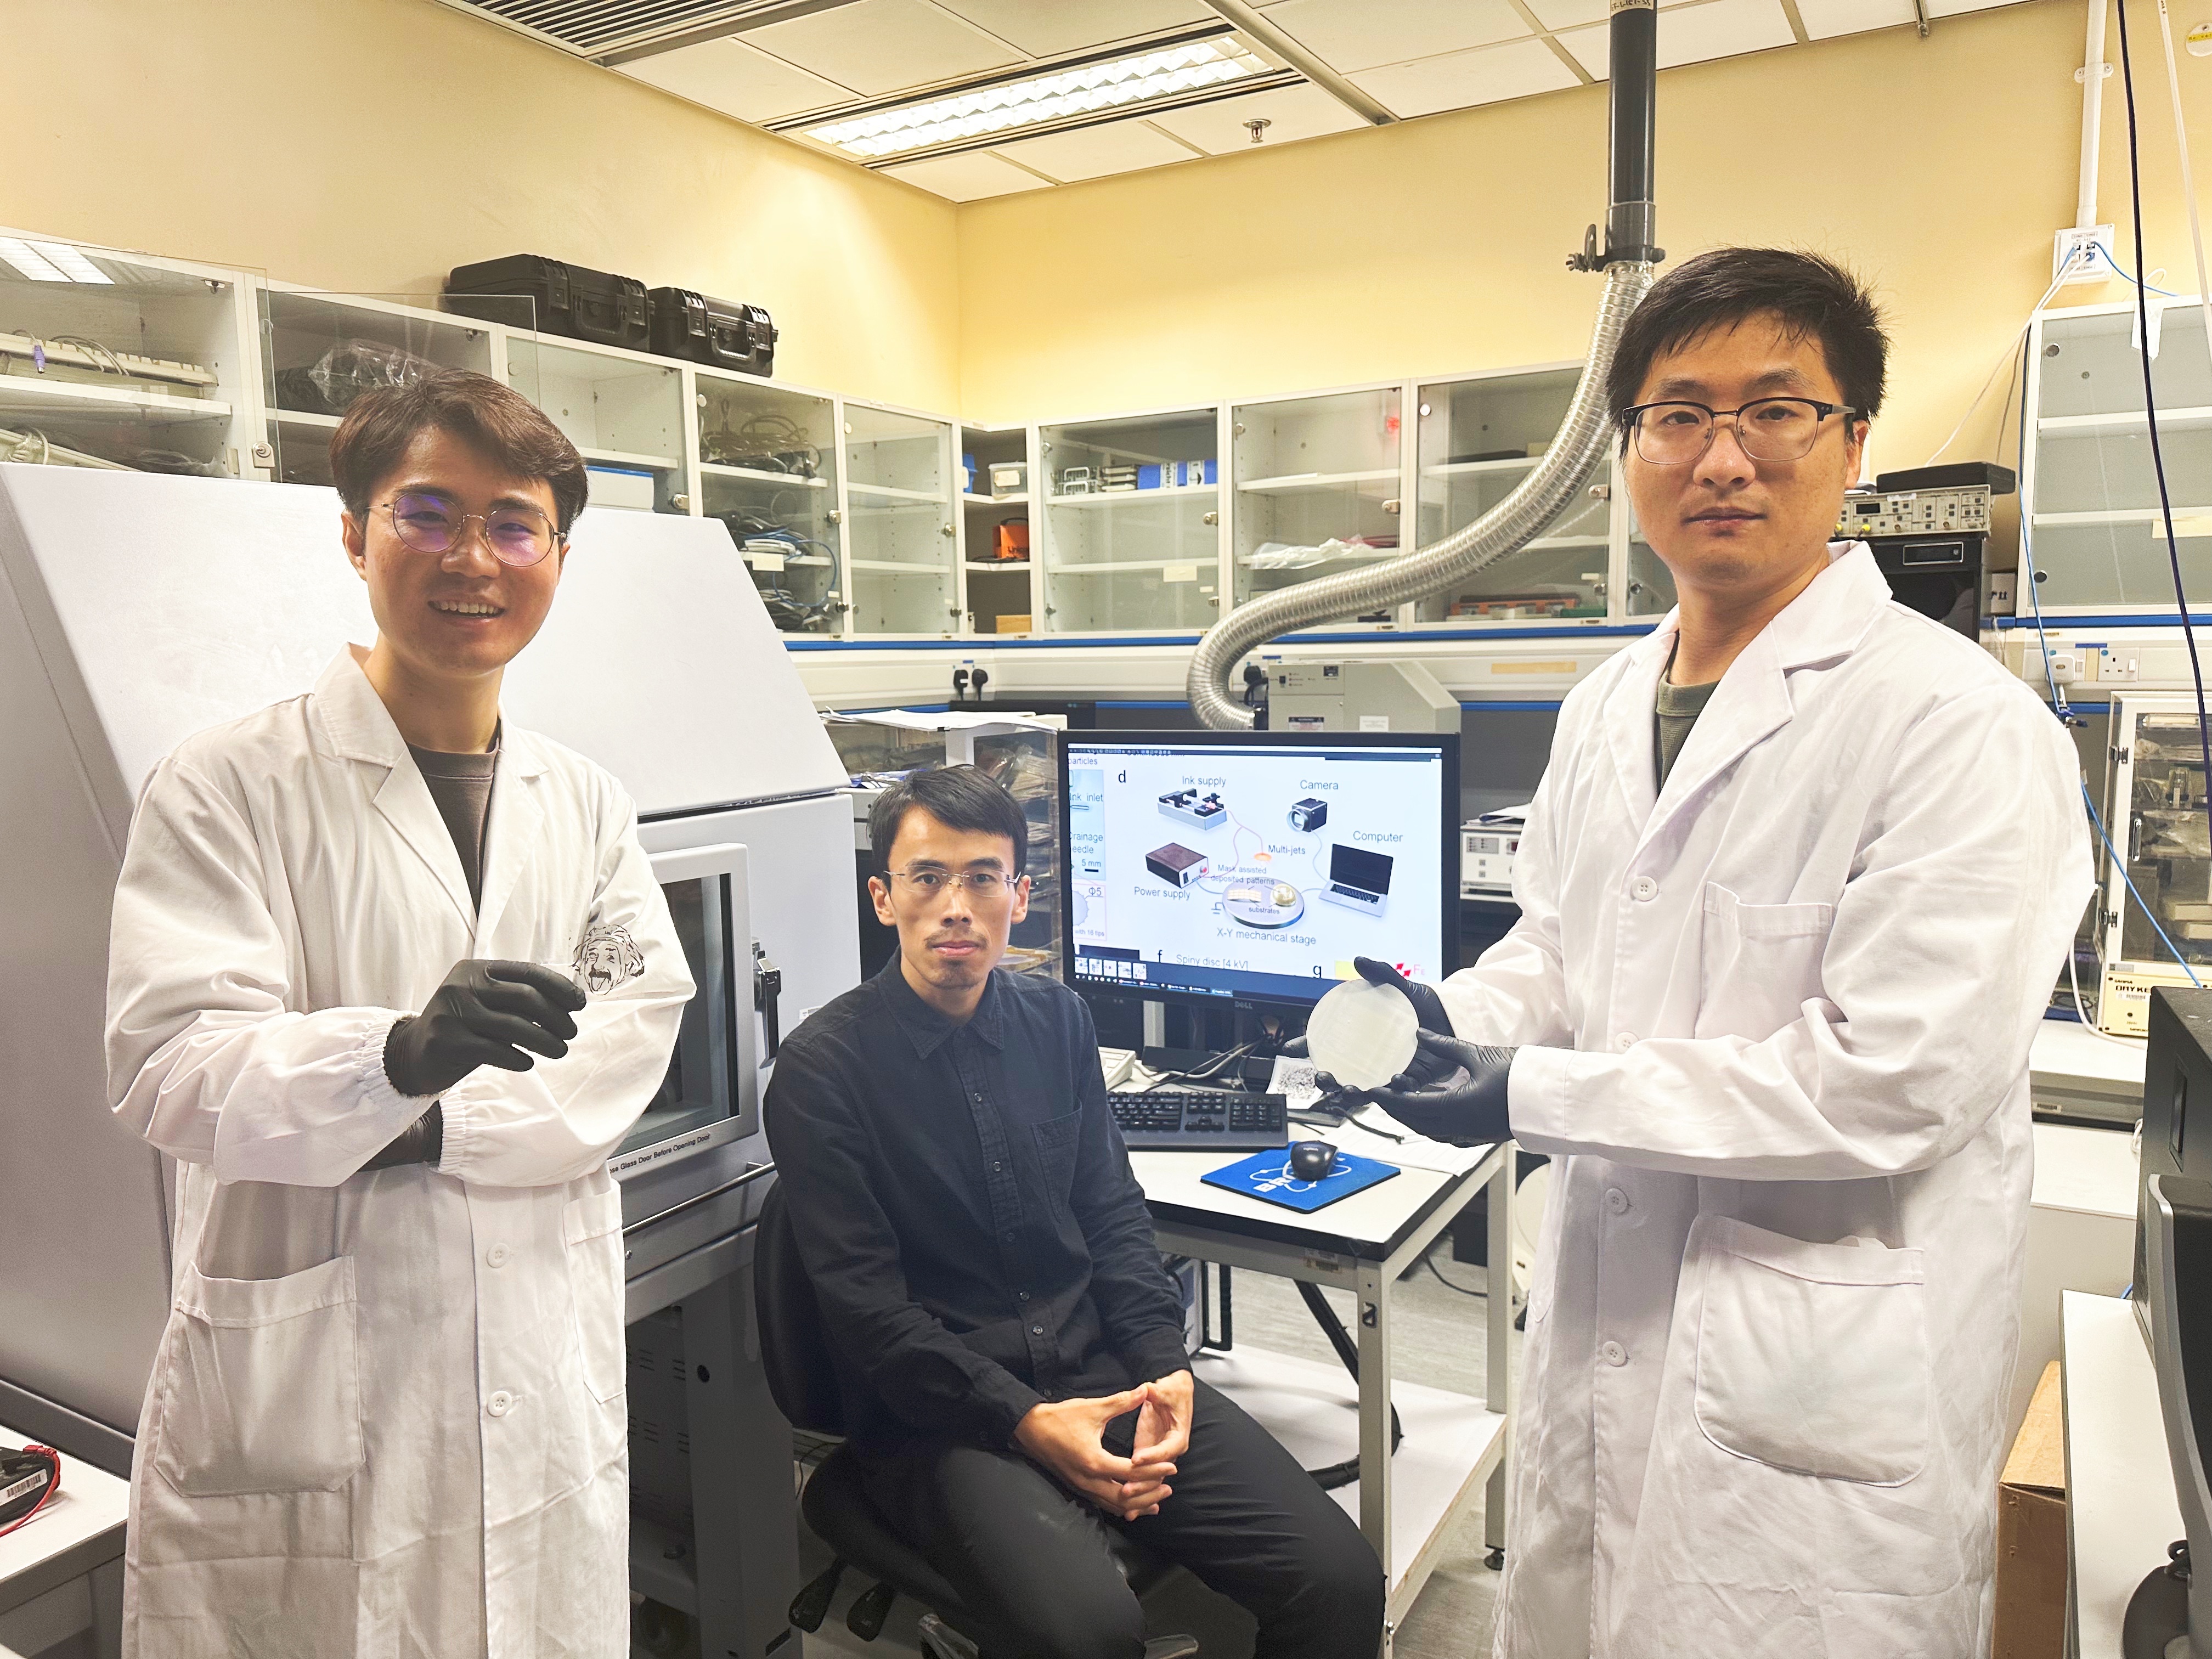 Prof. YANG Zhengbao, Associate Professor at HKUST’s Department of Mechanical & Aerospace Engineering (middle), CityU Postdoctoral Fellow Dr. LI Xuemu (right) and CityU Doctoral Student ZHANG Zhuomin (left).